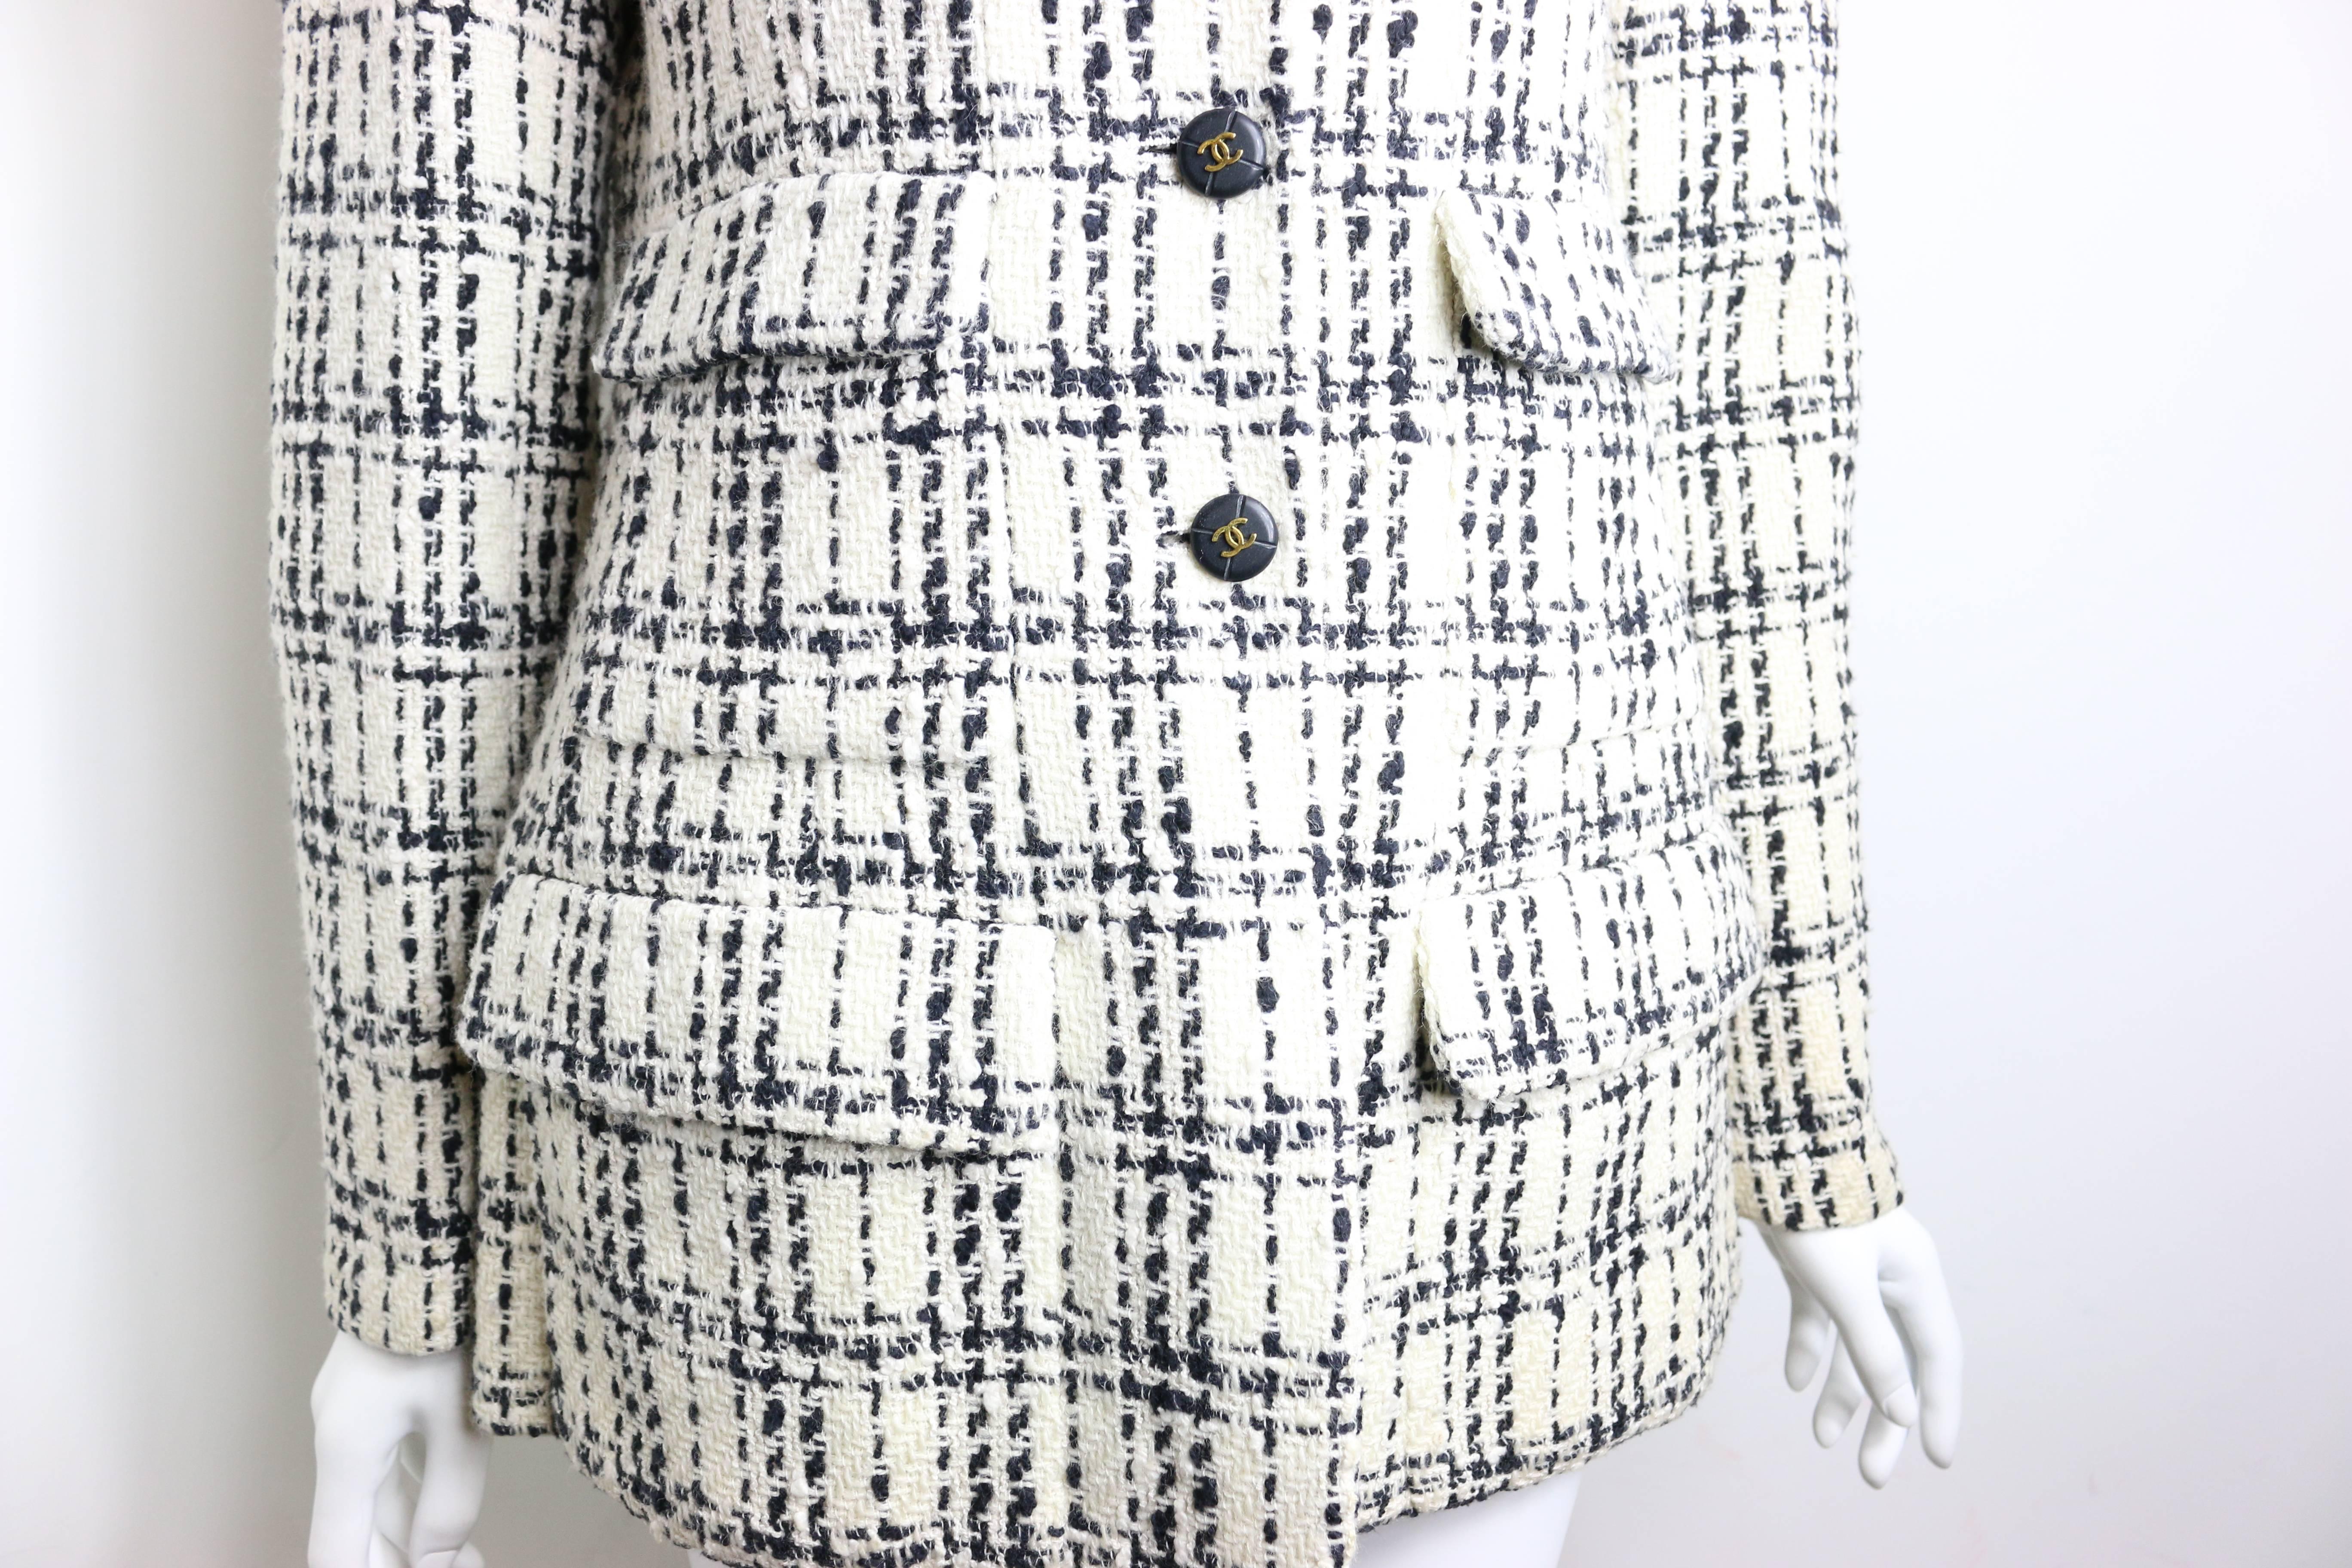 - Vintage Chanel classic black and white plaid pattern tweed cotton blend jacket. 

- Boxy cut with slightly padded shoulder. 

- Notched lapel. 

- Triple button-front closure. 

- Four Front flap pockets. 

- Button detail at cuffs.

- Fully